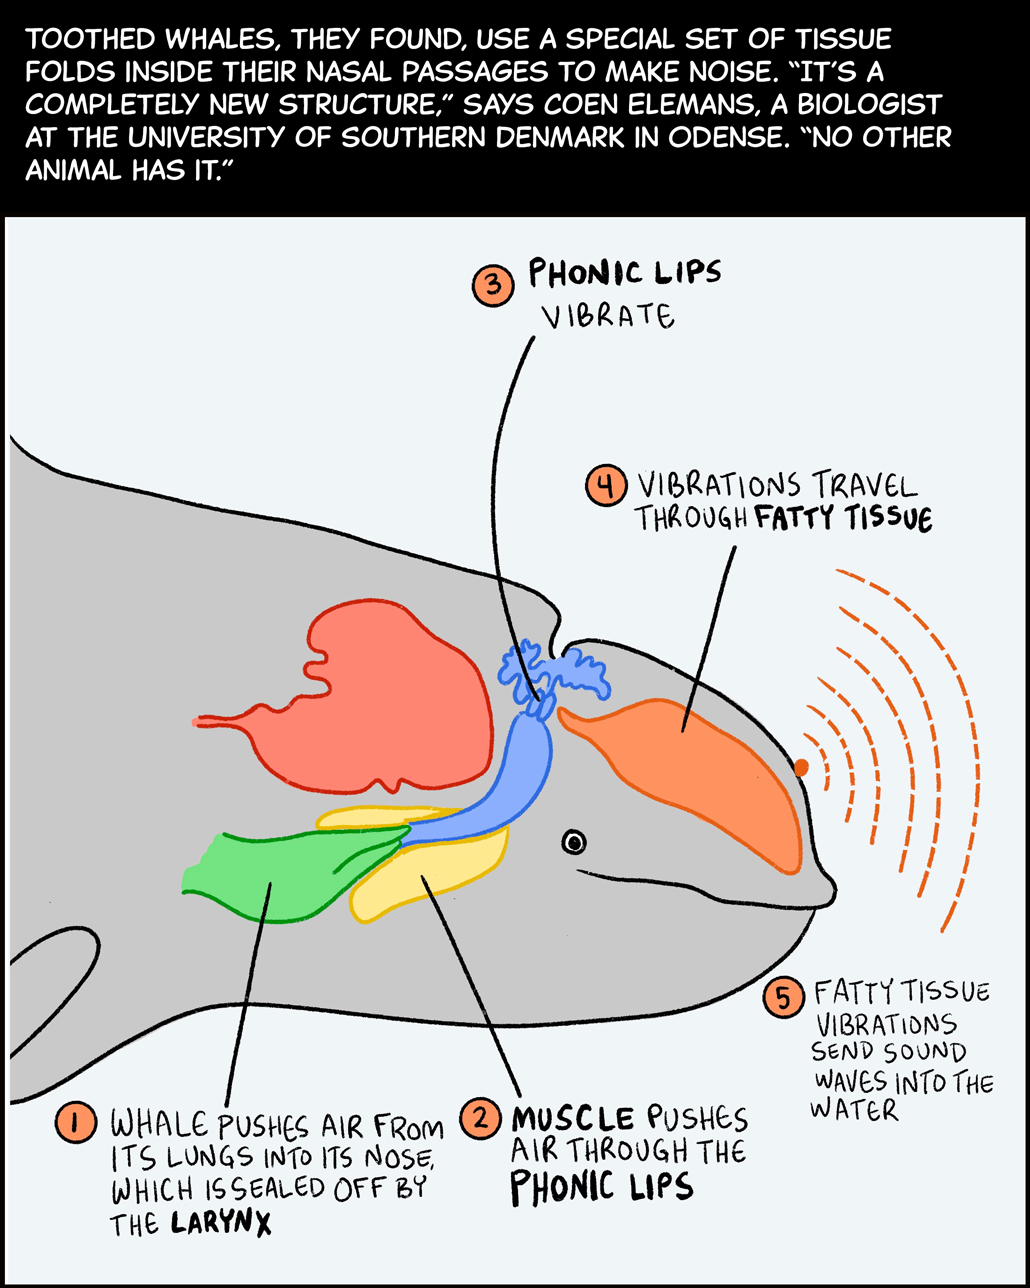 Text (above image): Toothed whales, they found, use a special set of tissue folds inside their nasal passages to make noise. “It’s a completely new structure,” says Coen Elemans, a biologist at the University of Southern Denmark in Odense. “No other animal has it.” Image: A diagram shows the inside of a whale’s head with numbers pointing to each step in the whale’s sound-making process. Step 1: Whale pushes air from its lungs into its nose, which is sealed off by the larynx. Step 2: Muscle pushes air through the phonic lips. Step 3: Phonic lips vibrate. Step 4: Vibrations travel through fatty tissue. Step 5: Fatty tissue vibrations send sound waves into the water. 